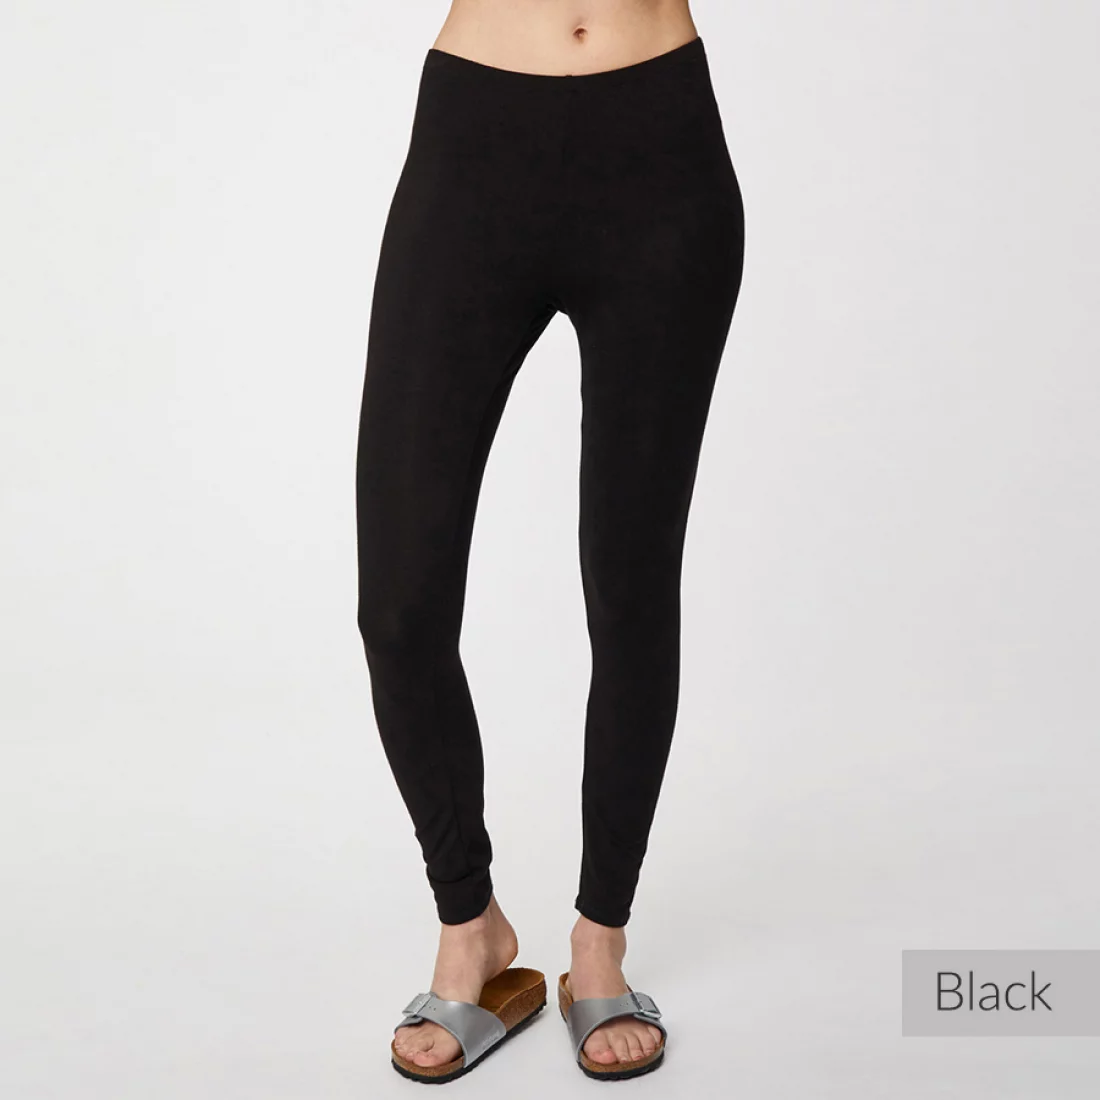 Our Bamboo Leggings are a perfect alternative if you hate wearing stoc